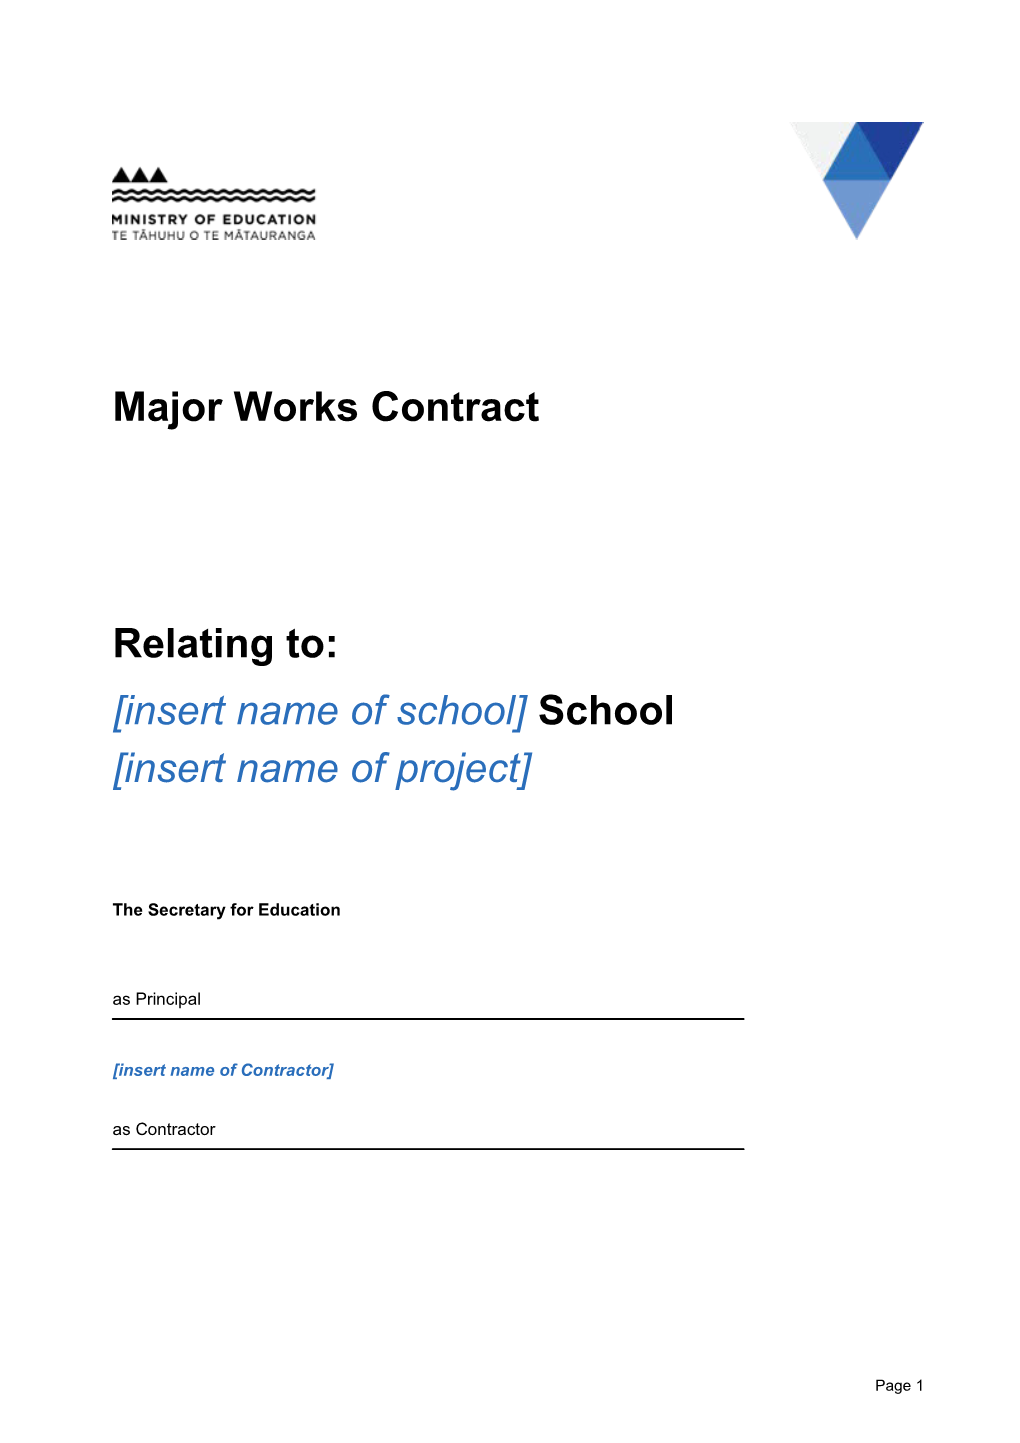 Major Works Contract Template